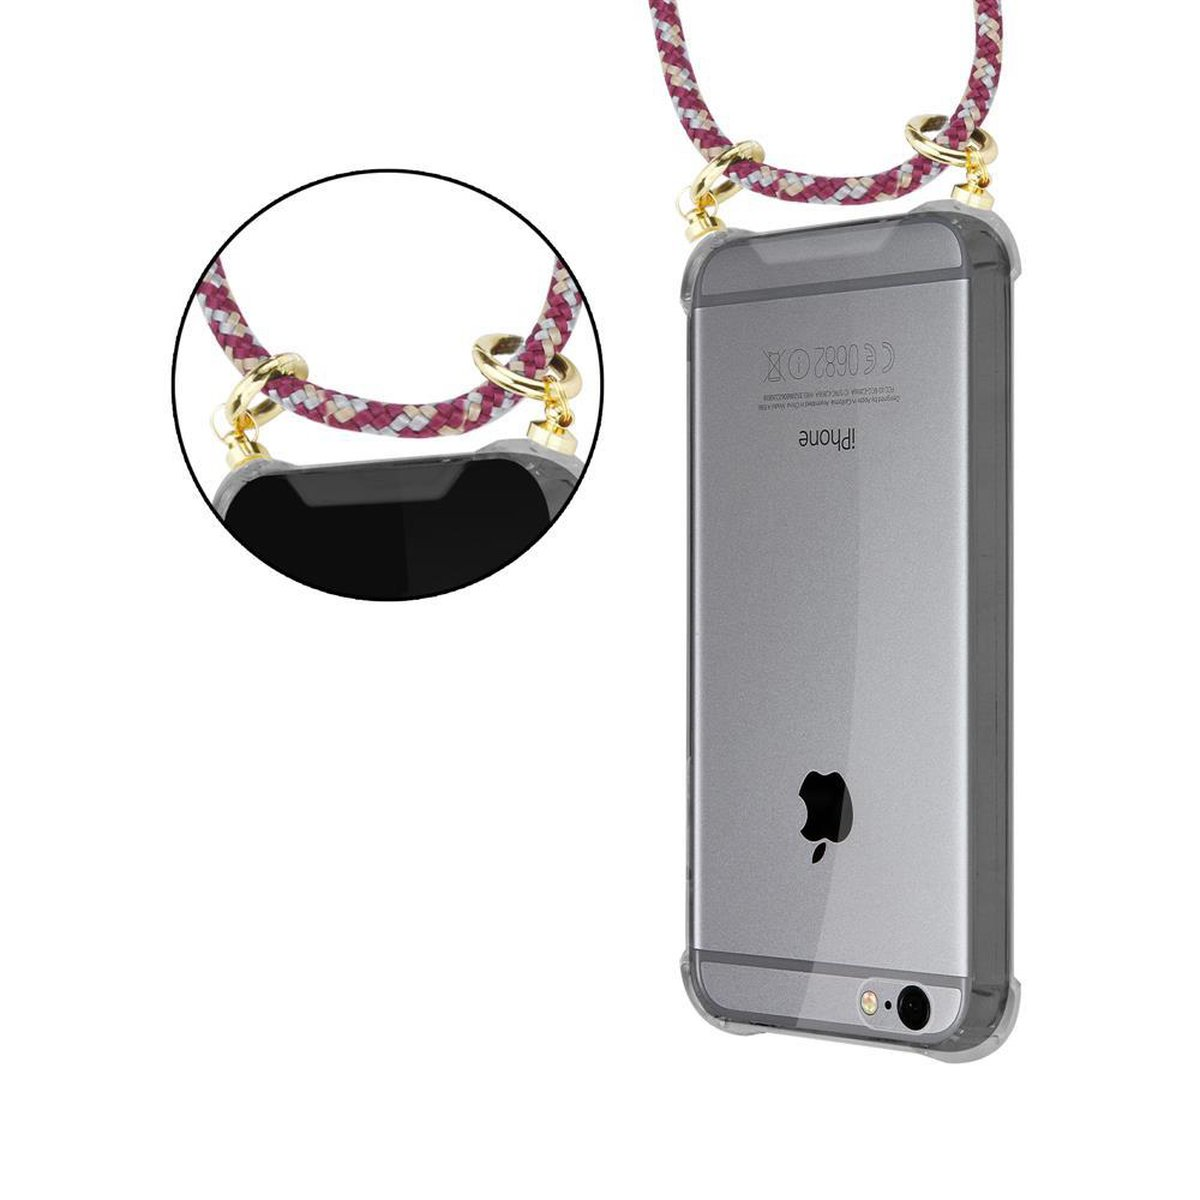 CADORABO Handy Kette Hülle, / abnehmbarer PLUS 6S mit WEIß Apple, PLUS, Backcover, Gold ROT Ringen, Band GELB und iPhone 6 Kordel